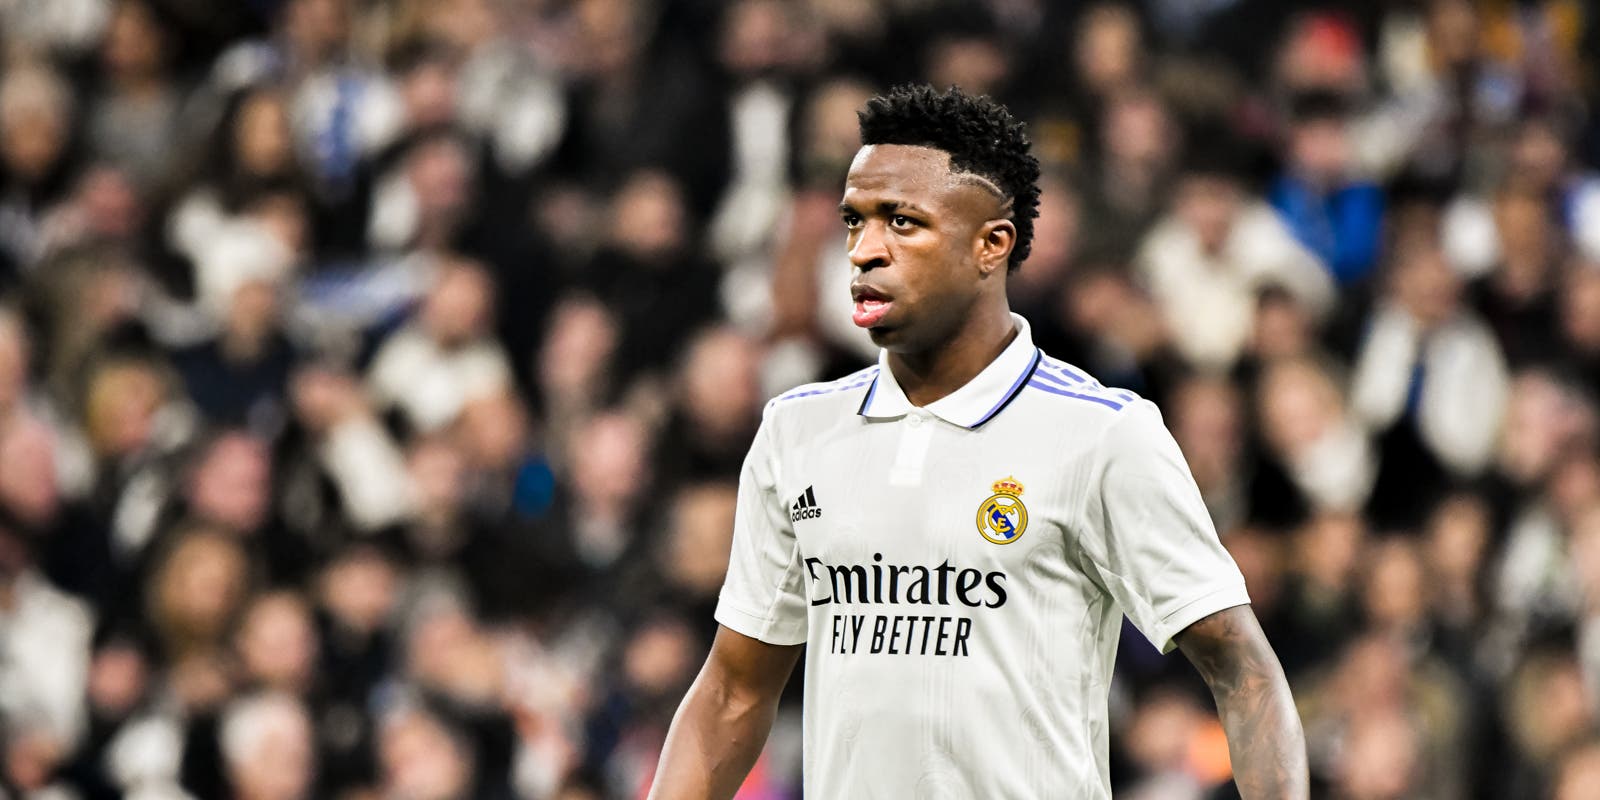 Real Madrid's new plan has Vinicius in doubt: historic offer to leave now
	

